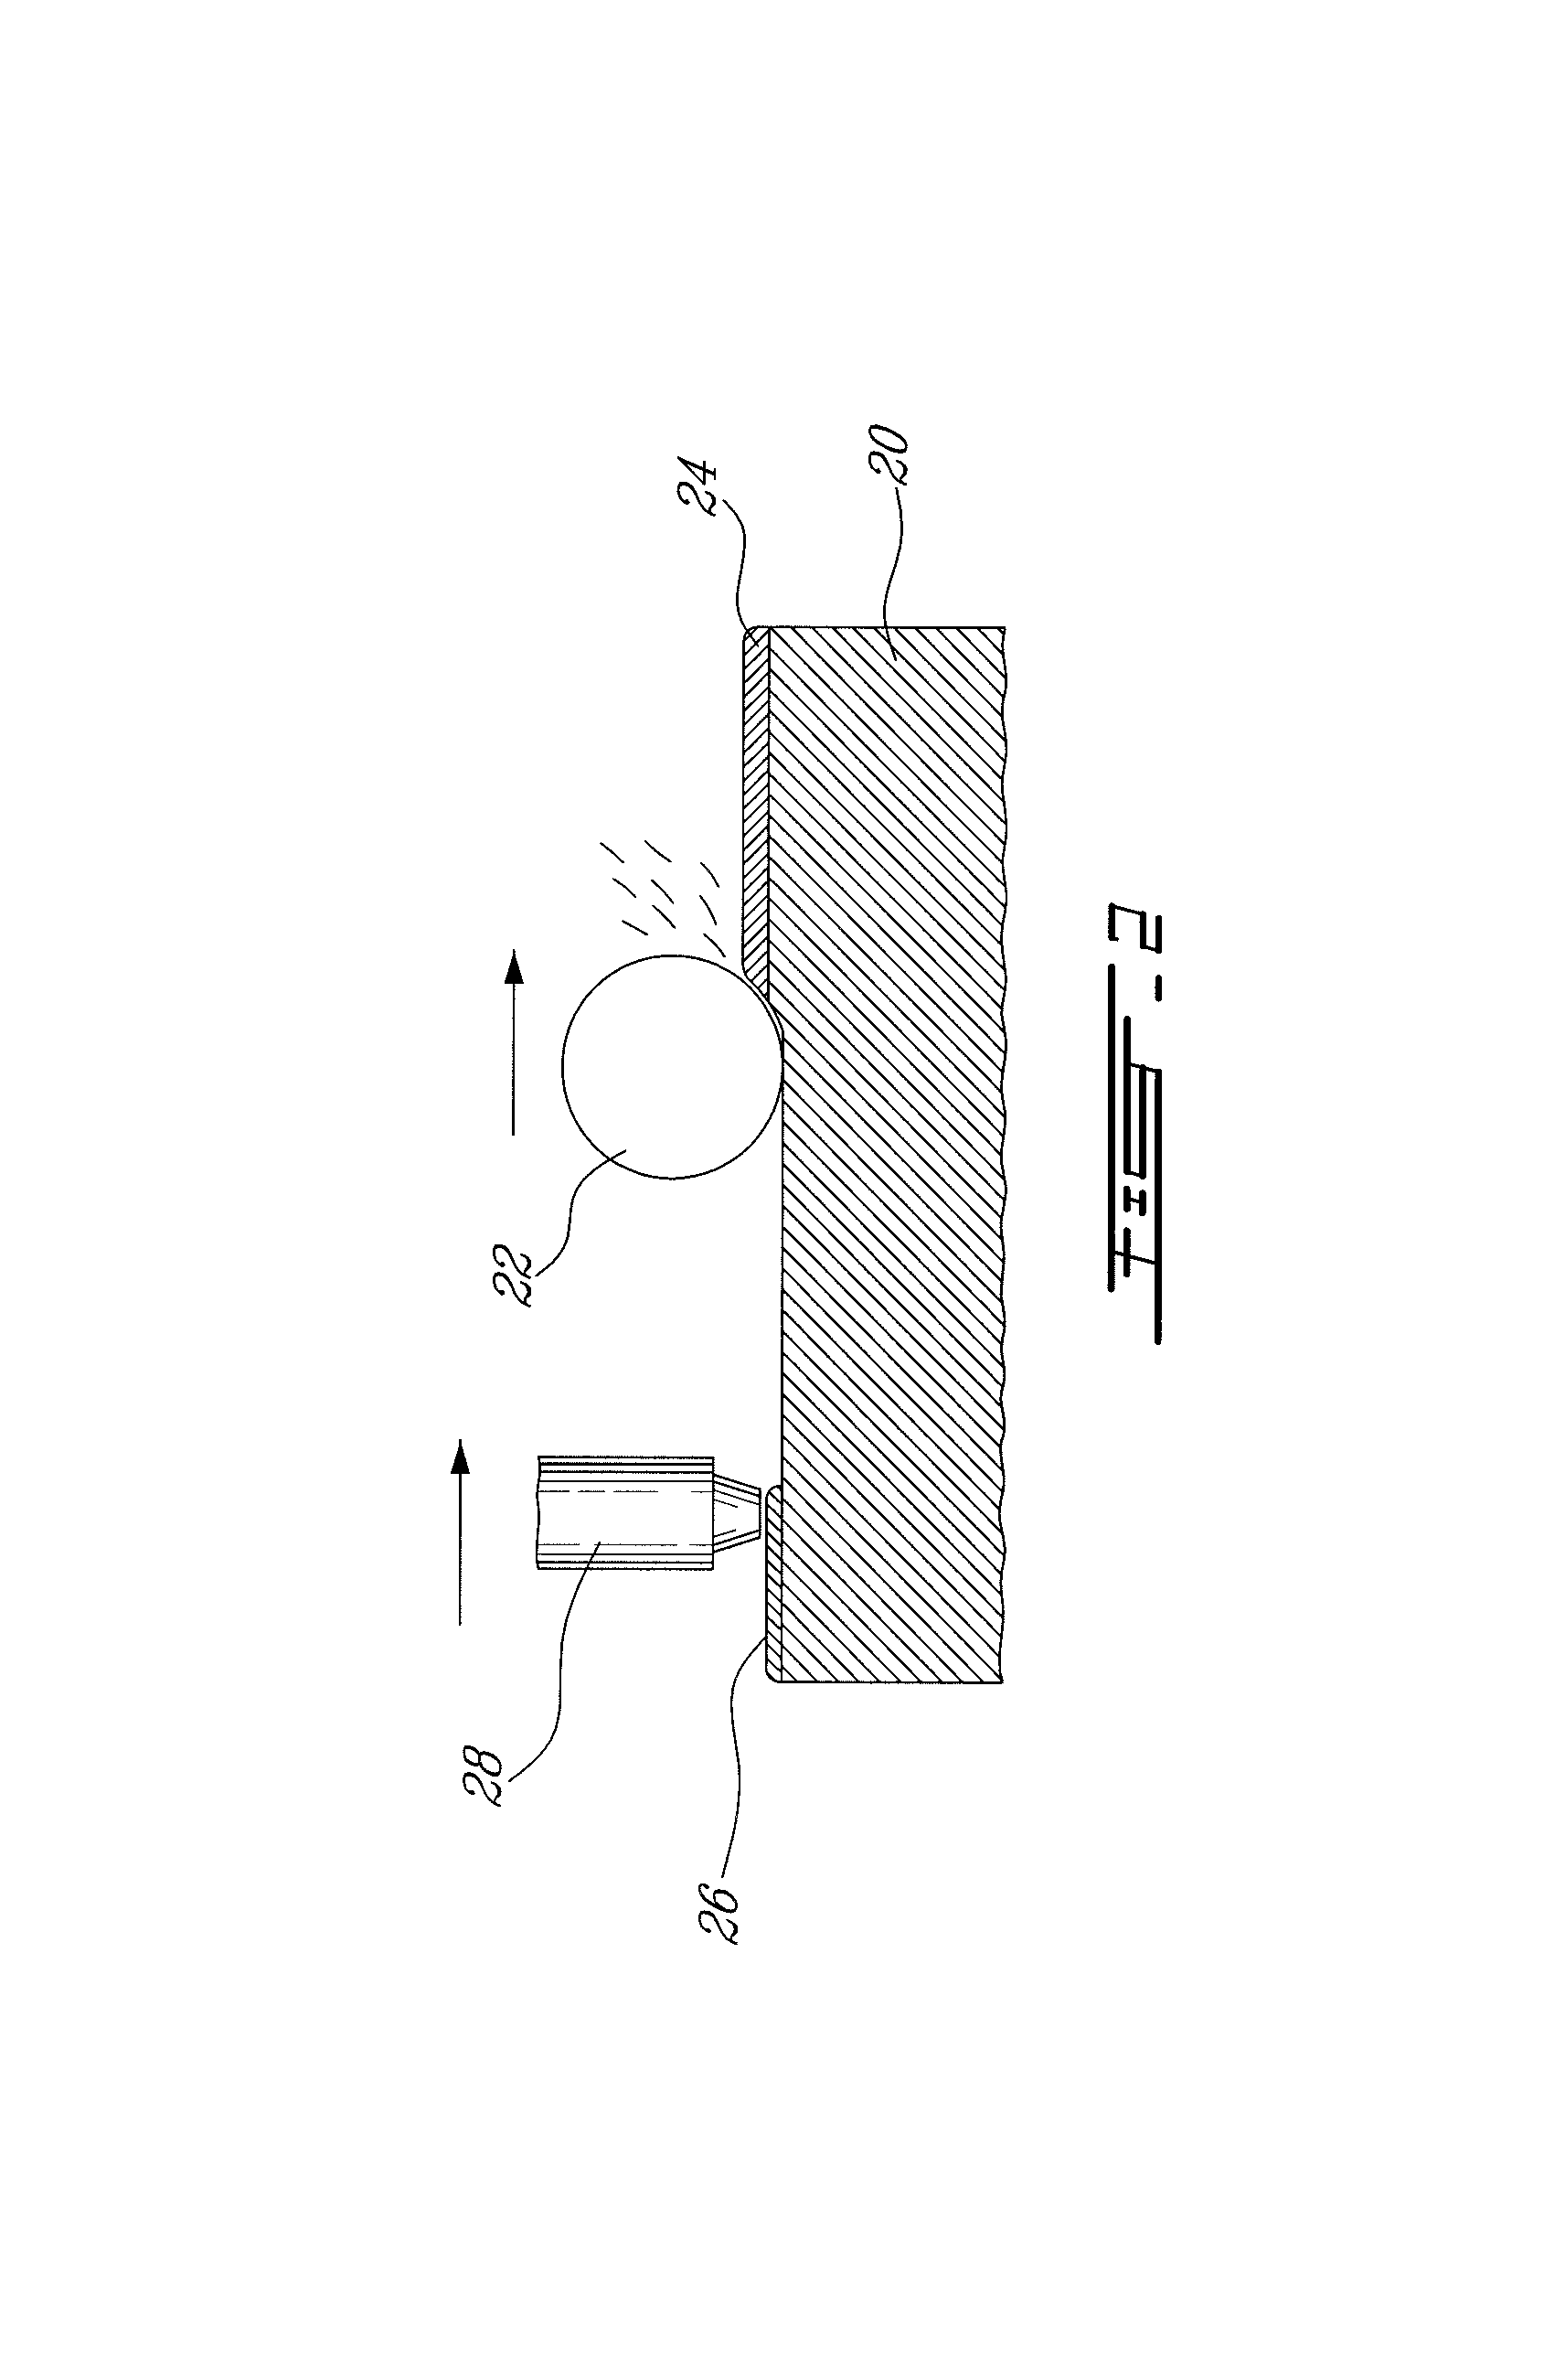 Oxidation protected blade and method of manufacturing